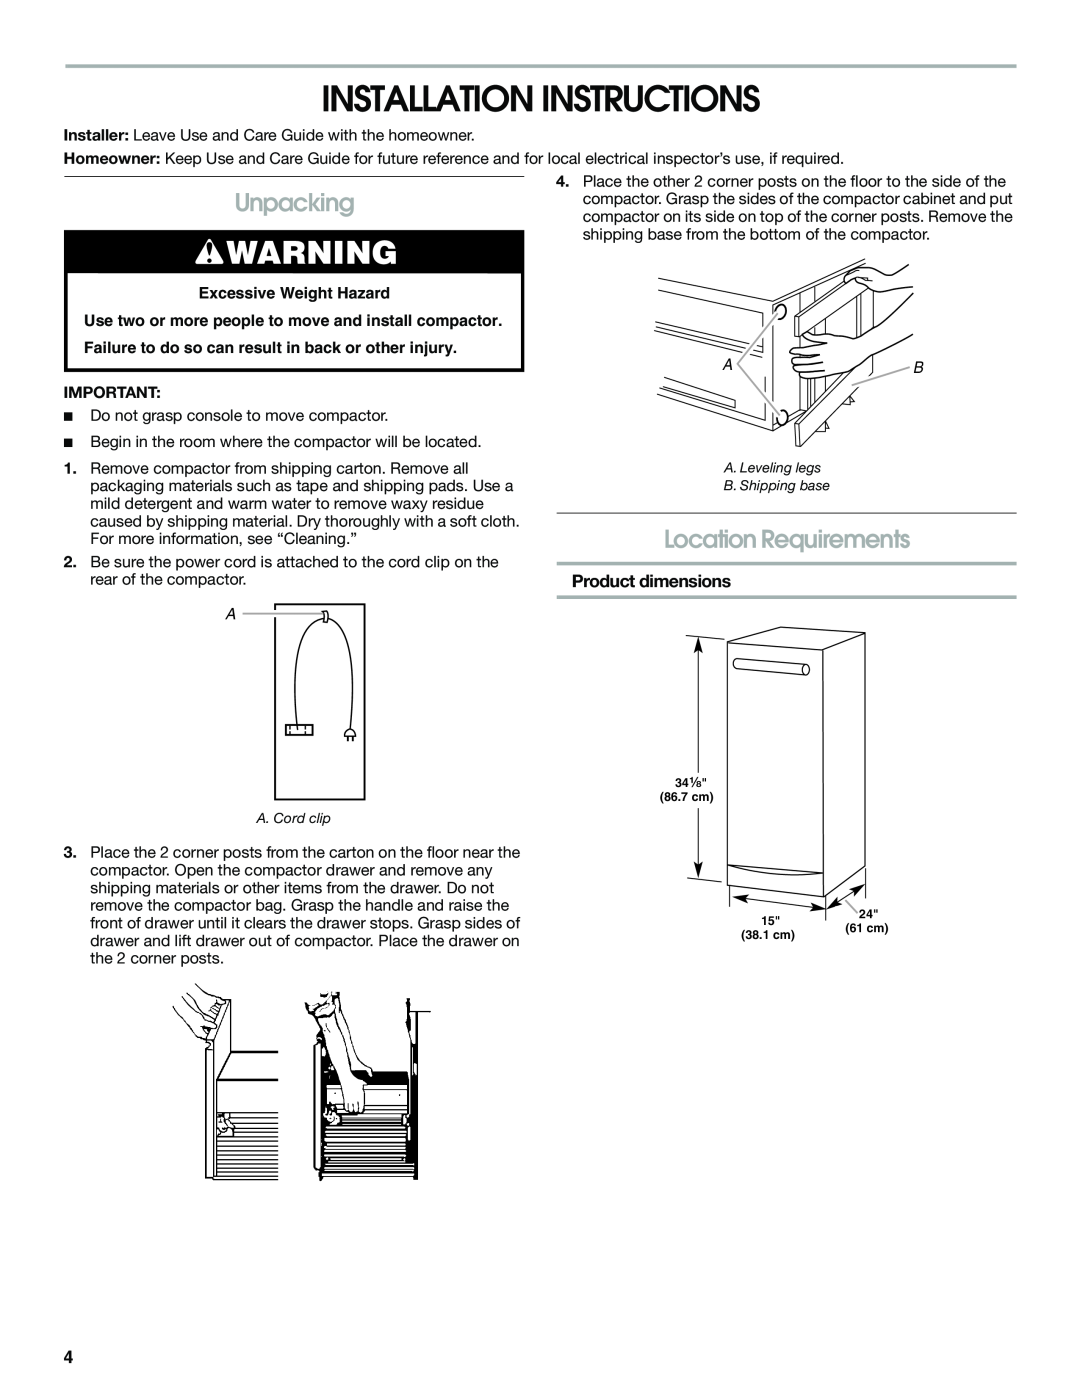 Jenn-Air W10242571A manual Installation Instructions, Unpacking, Location Requirements, Product dimensions 